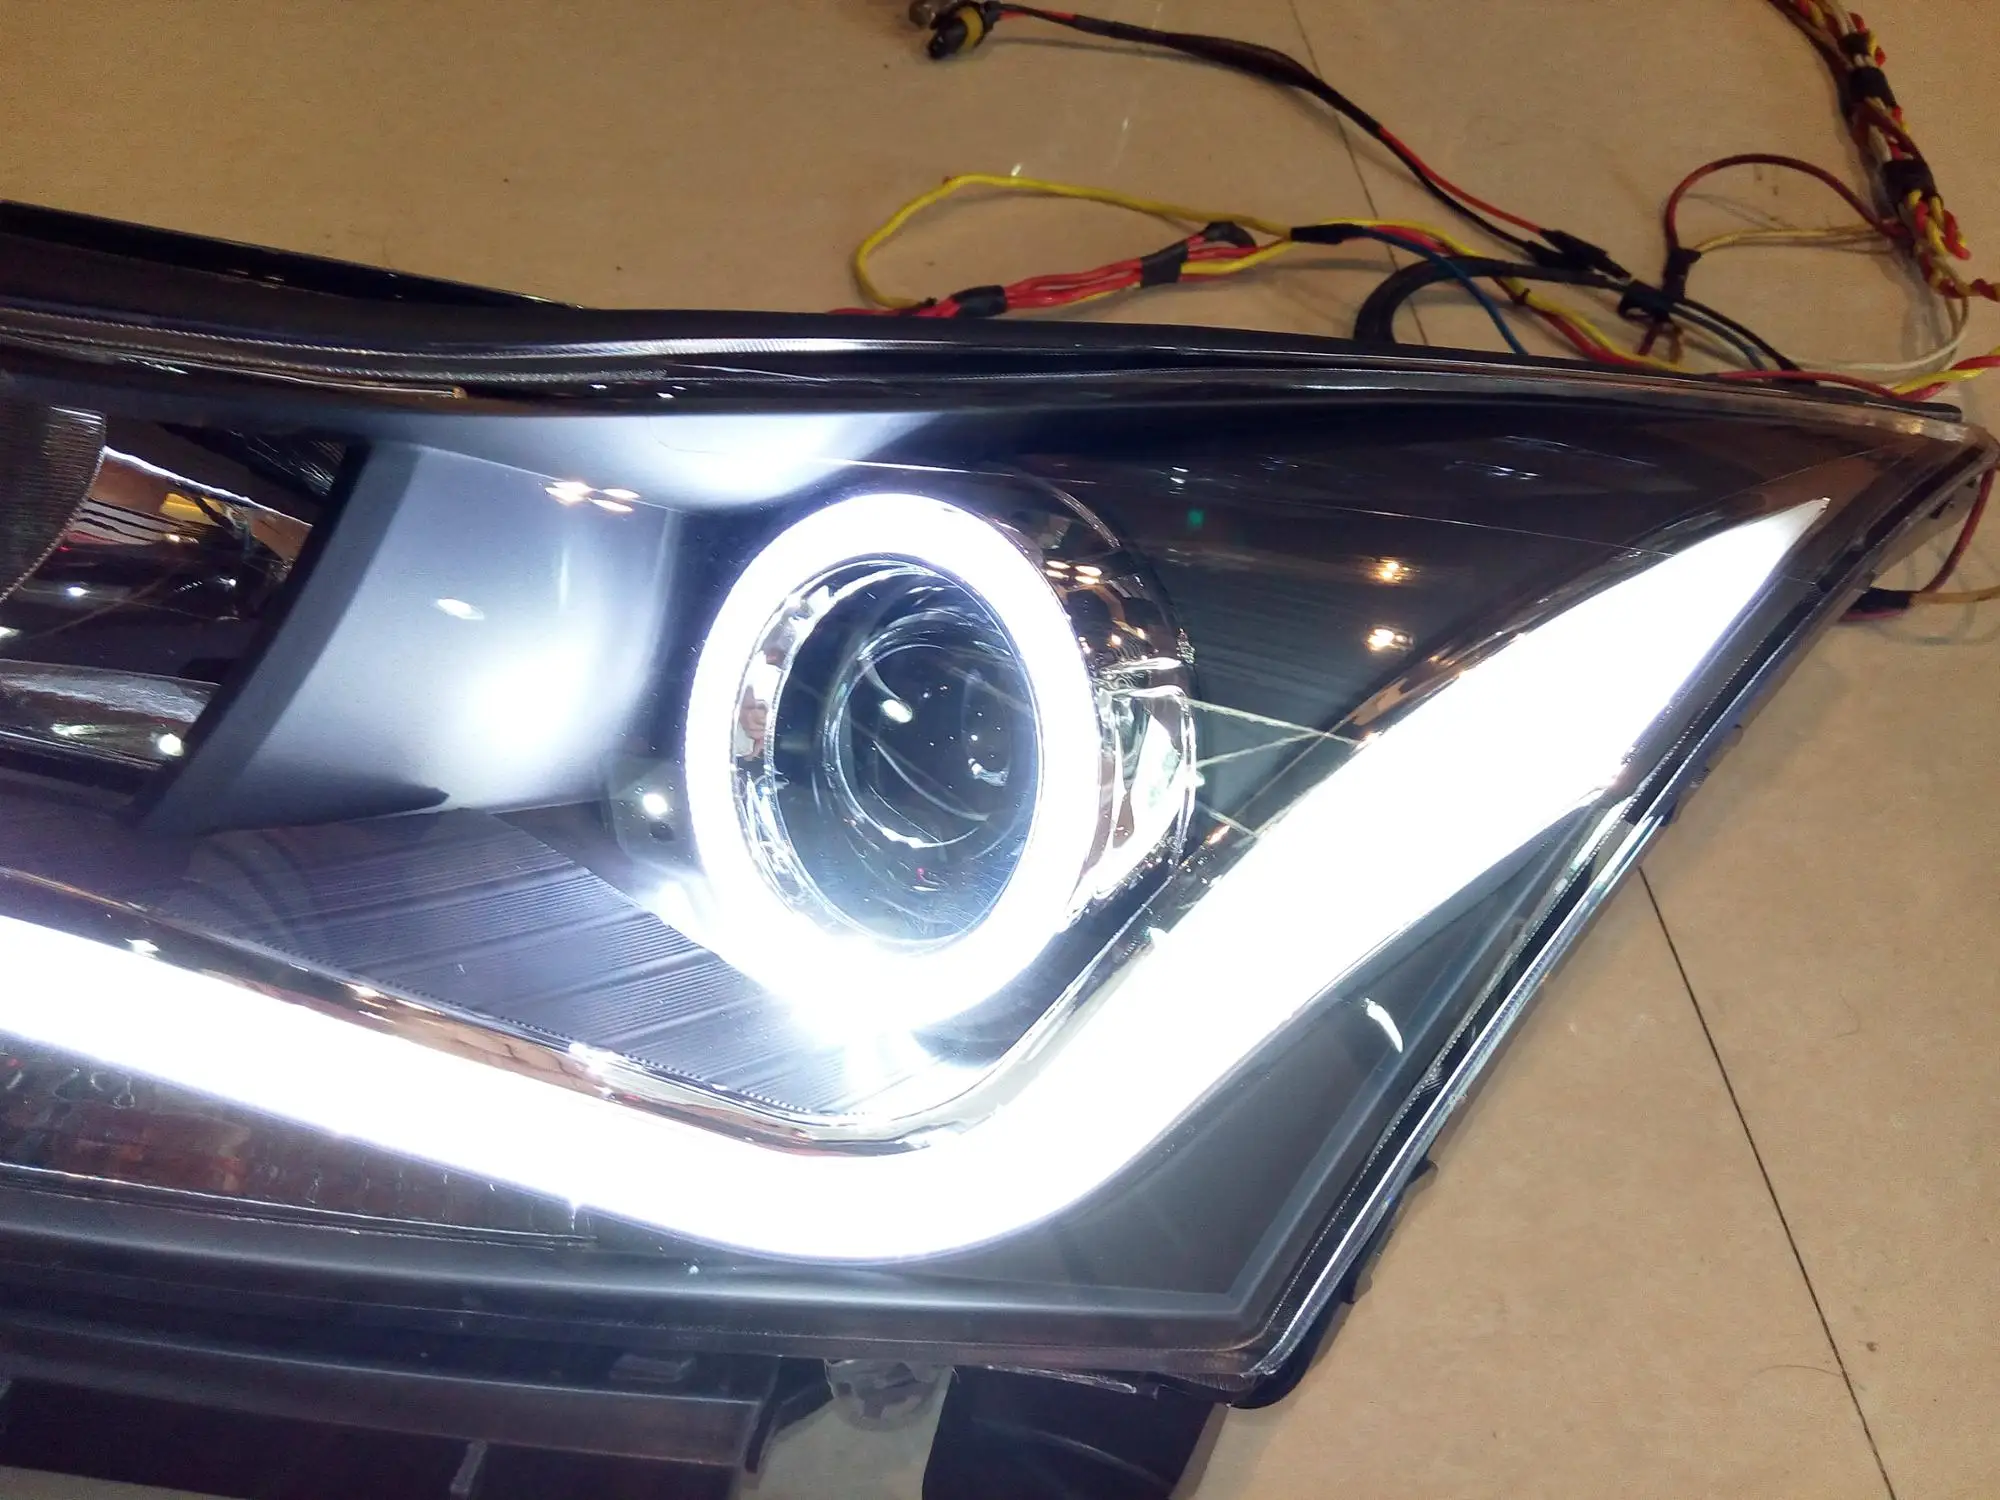 VLAND manufacturer for Cruze headlight for 2010 2011 2012 2013 2014 for CRUZE LED head lamp wholesale price